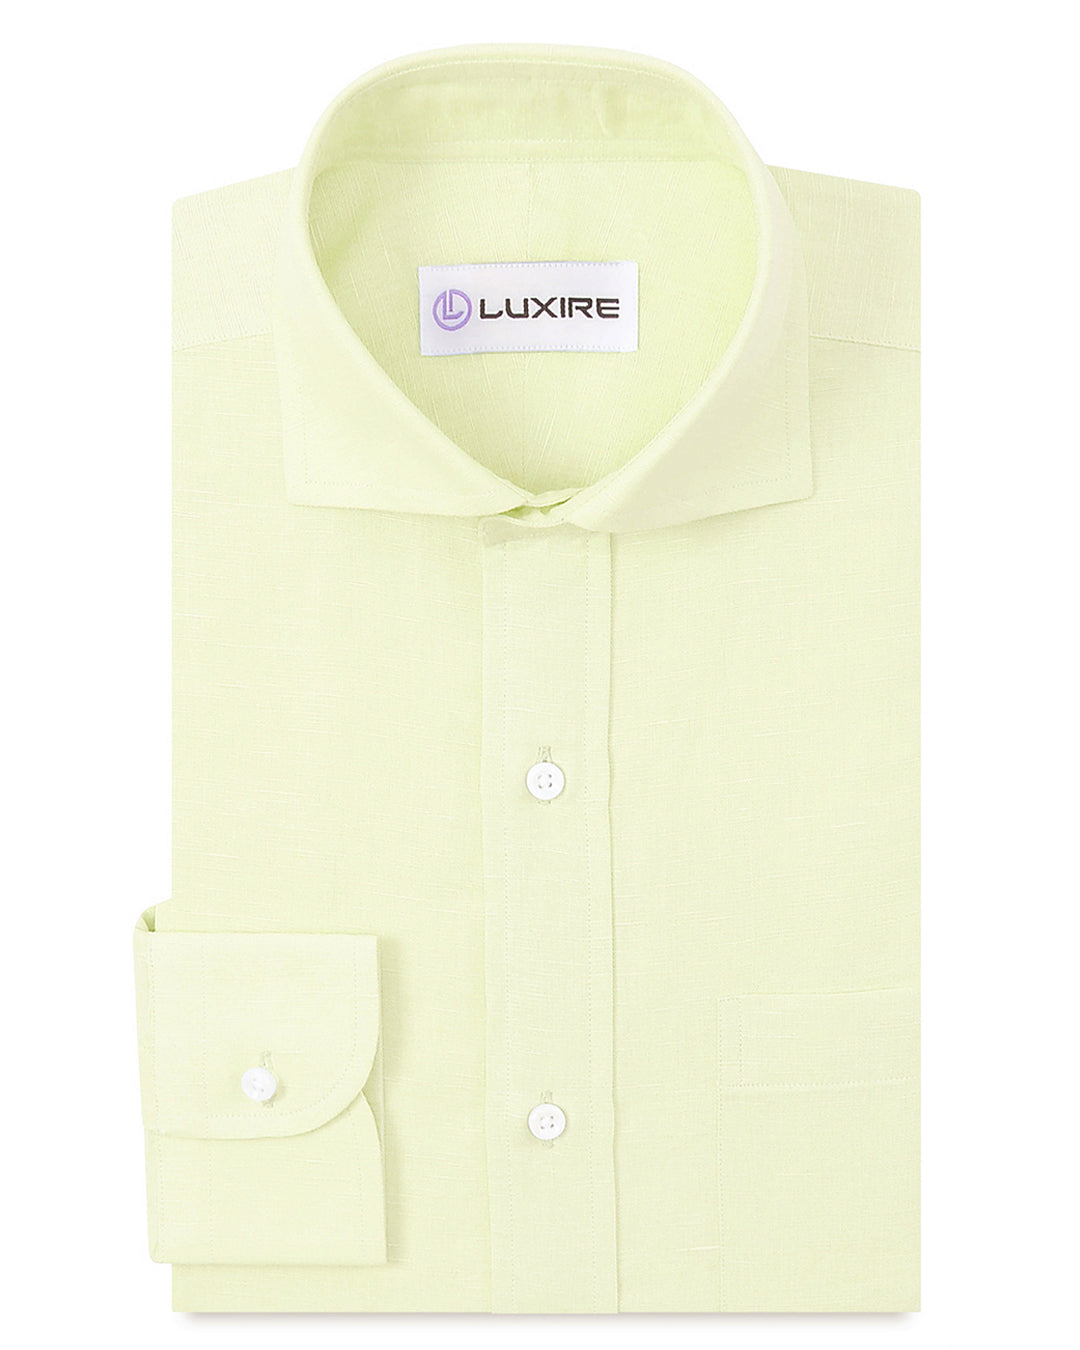 Front of the custom linen shirt for men in pale yellow by Luxire Clothing